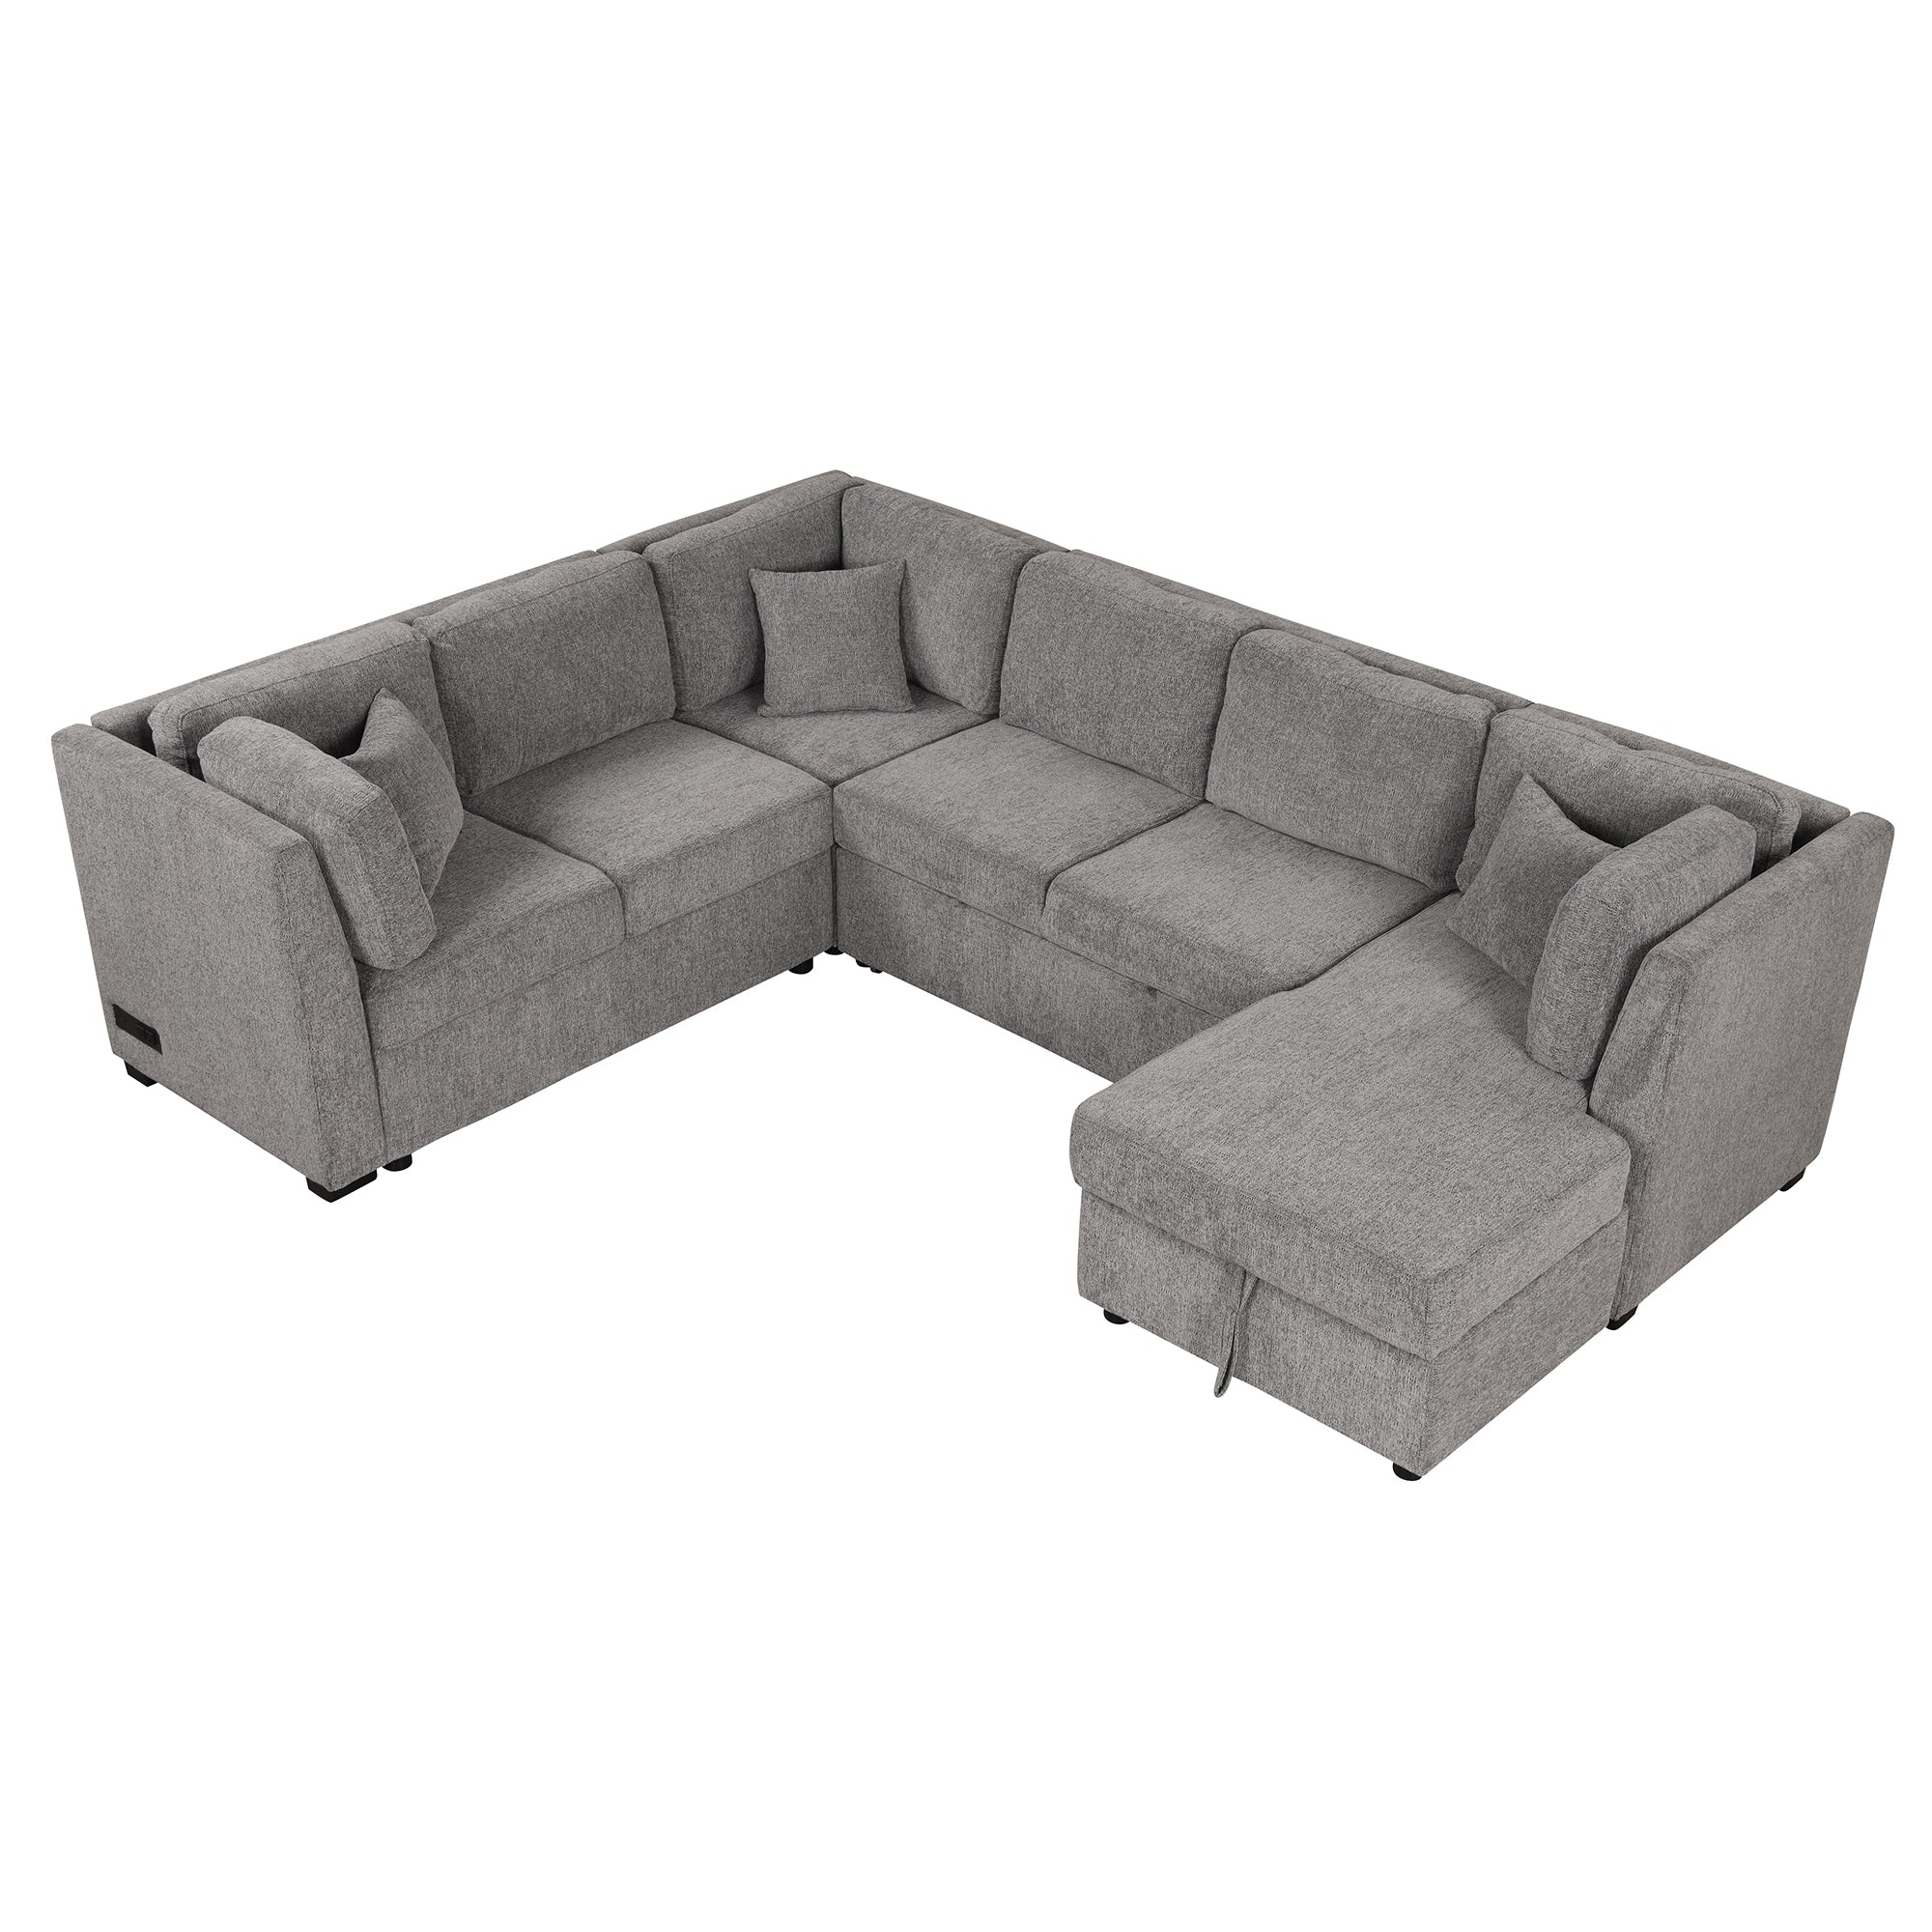 U-Shaped Sectional Sofa Bed w/ Storage Chaise - Light Gray-Stationary Sectionals-American Furniture Outlet